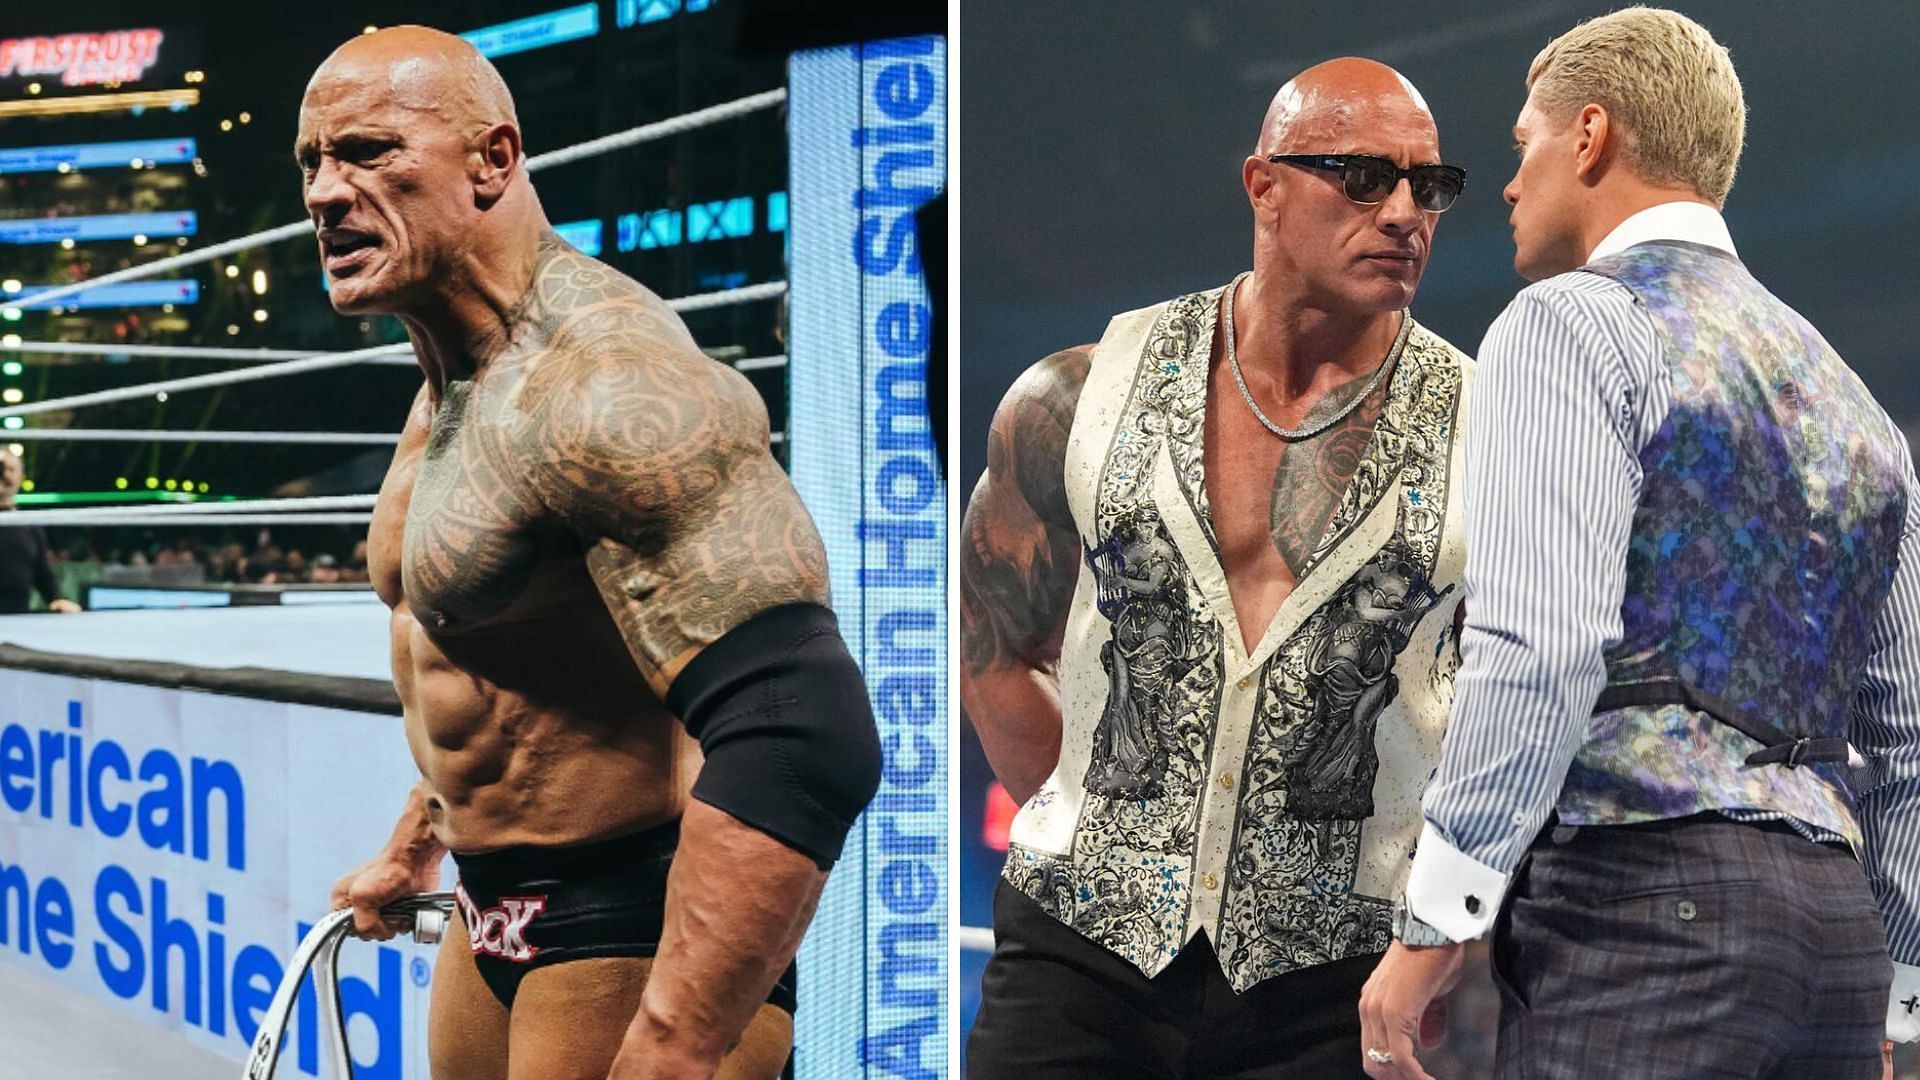 The Rock feuded with Cody Rhodes in latest WWE run [Image credits: star